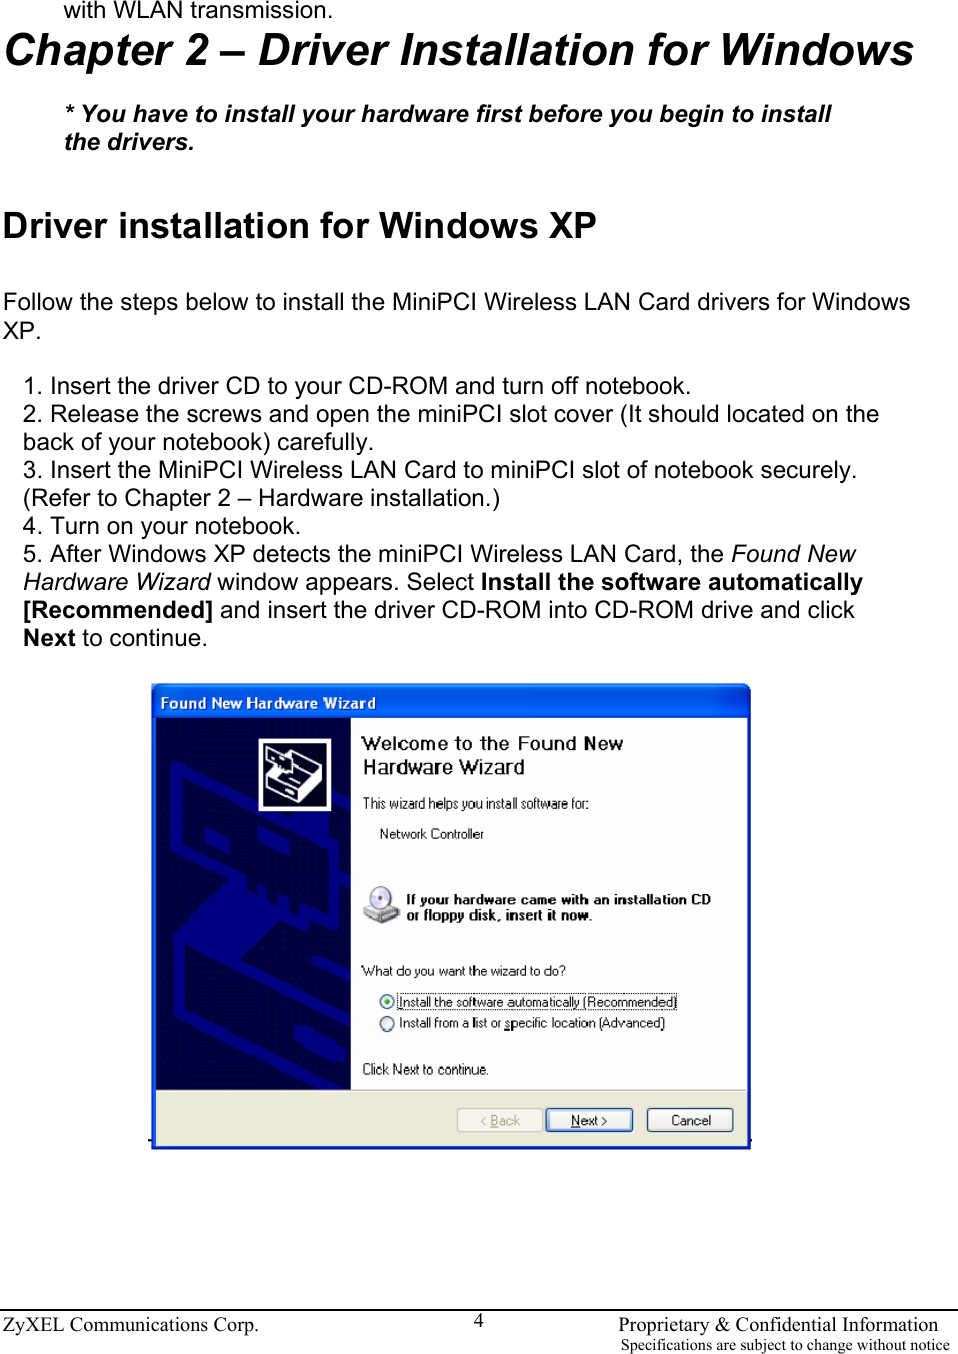  ZyXEL Communications Corp.                                                                       Proprietary &amp; Confidential Information                                                                                                                           Specifications are subject to change without notice 4 with WLAN transmission. Chapter 2 – Driver Installation for Windows  * You have to install your hardware first before you begin to install the drivers.   Driver installation for Windows XP  Follow the steps below to install the MiniPCI Wireless LAN Card drivers for Windows XP.  1. Insert the driver CD to your CD-ROM and turn off notebook. 2. Release the screws and open the miniPCI slot cover (It should located on the back of your notebook) carefully. 3. Insert the MiniPCI Wireless LAN Card to miniPCI slot of notebook securely. (Refer to Chapter 2 – Hardware installation.) 4. Turn on your notebook. 5. After Windows XP detects the miniPCI Wireless LAN Card, the Found New Hardware Wizard window appears. Select Install the software automatically [Recommended] and insert the driver CD-ROM into CD-ROM drive and click Next to continue.        